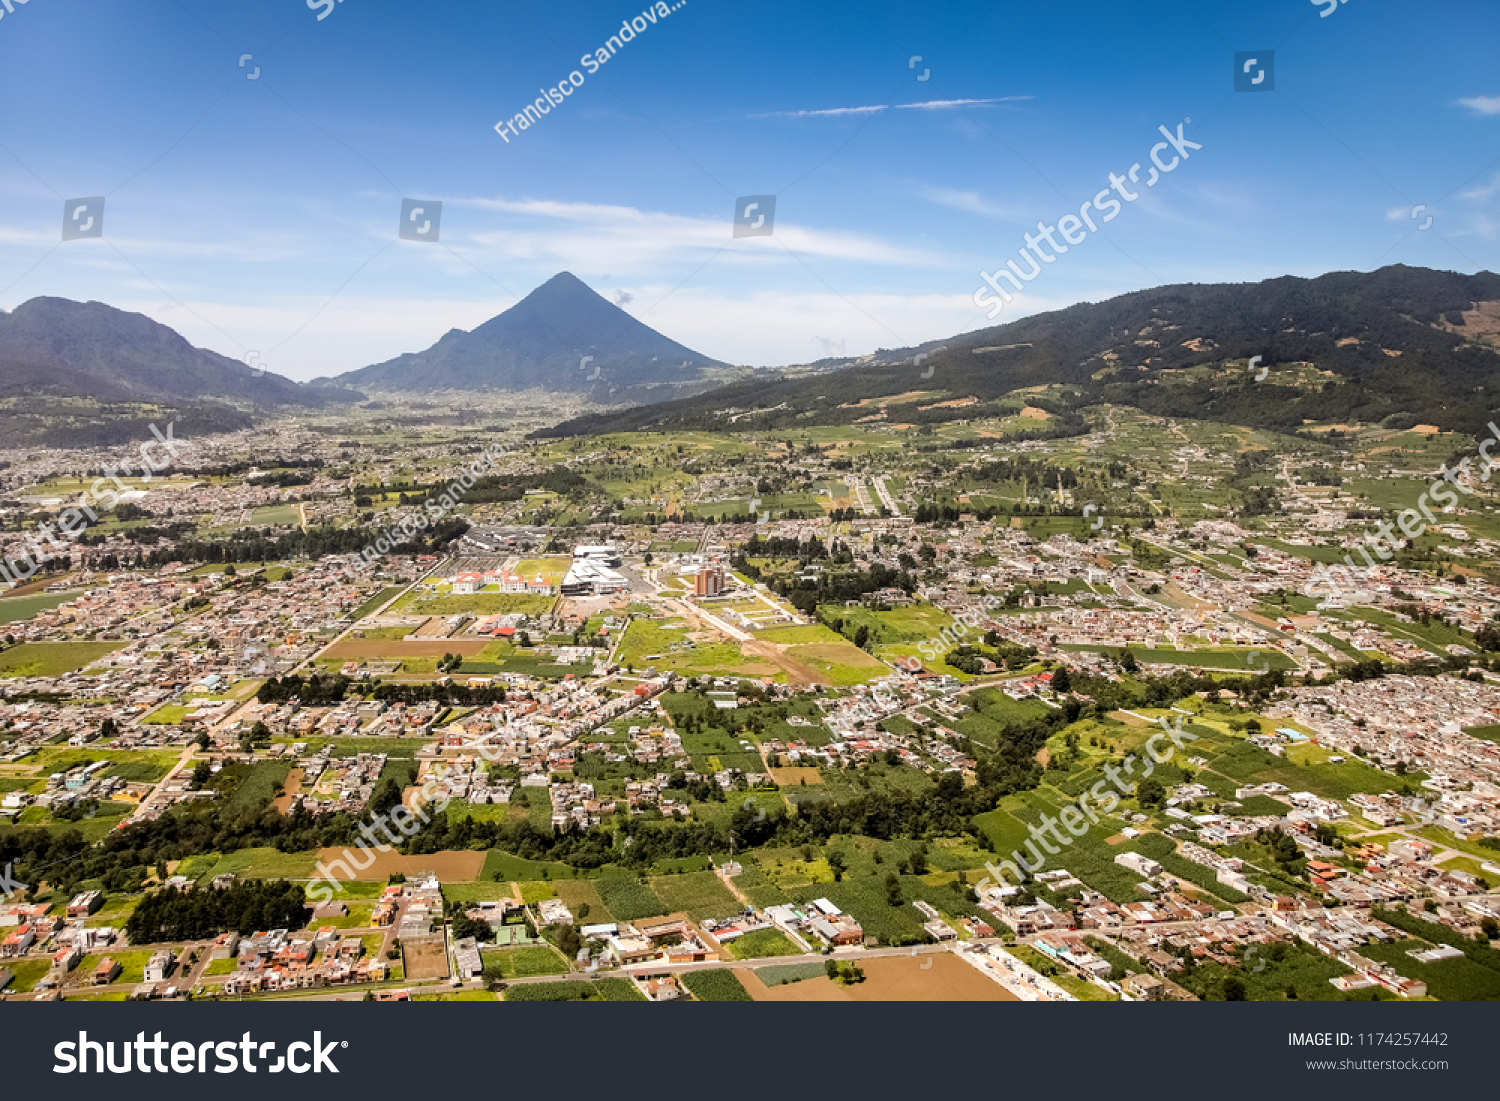 Aerial view of Quetzaltenango, the second largest city of Guatemala, Central America #1174257442